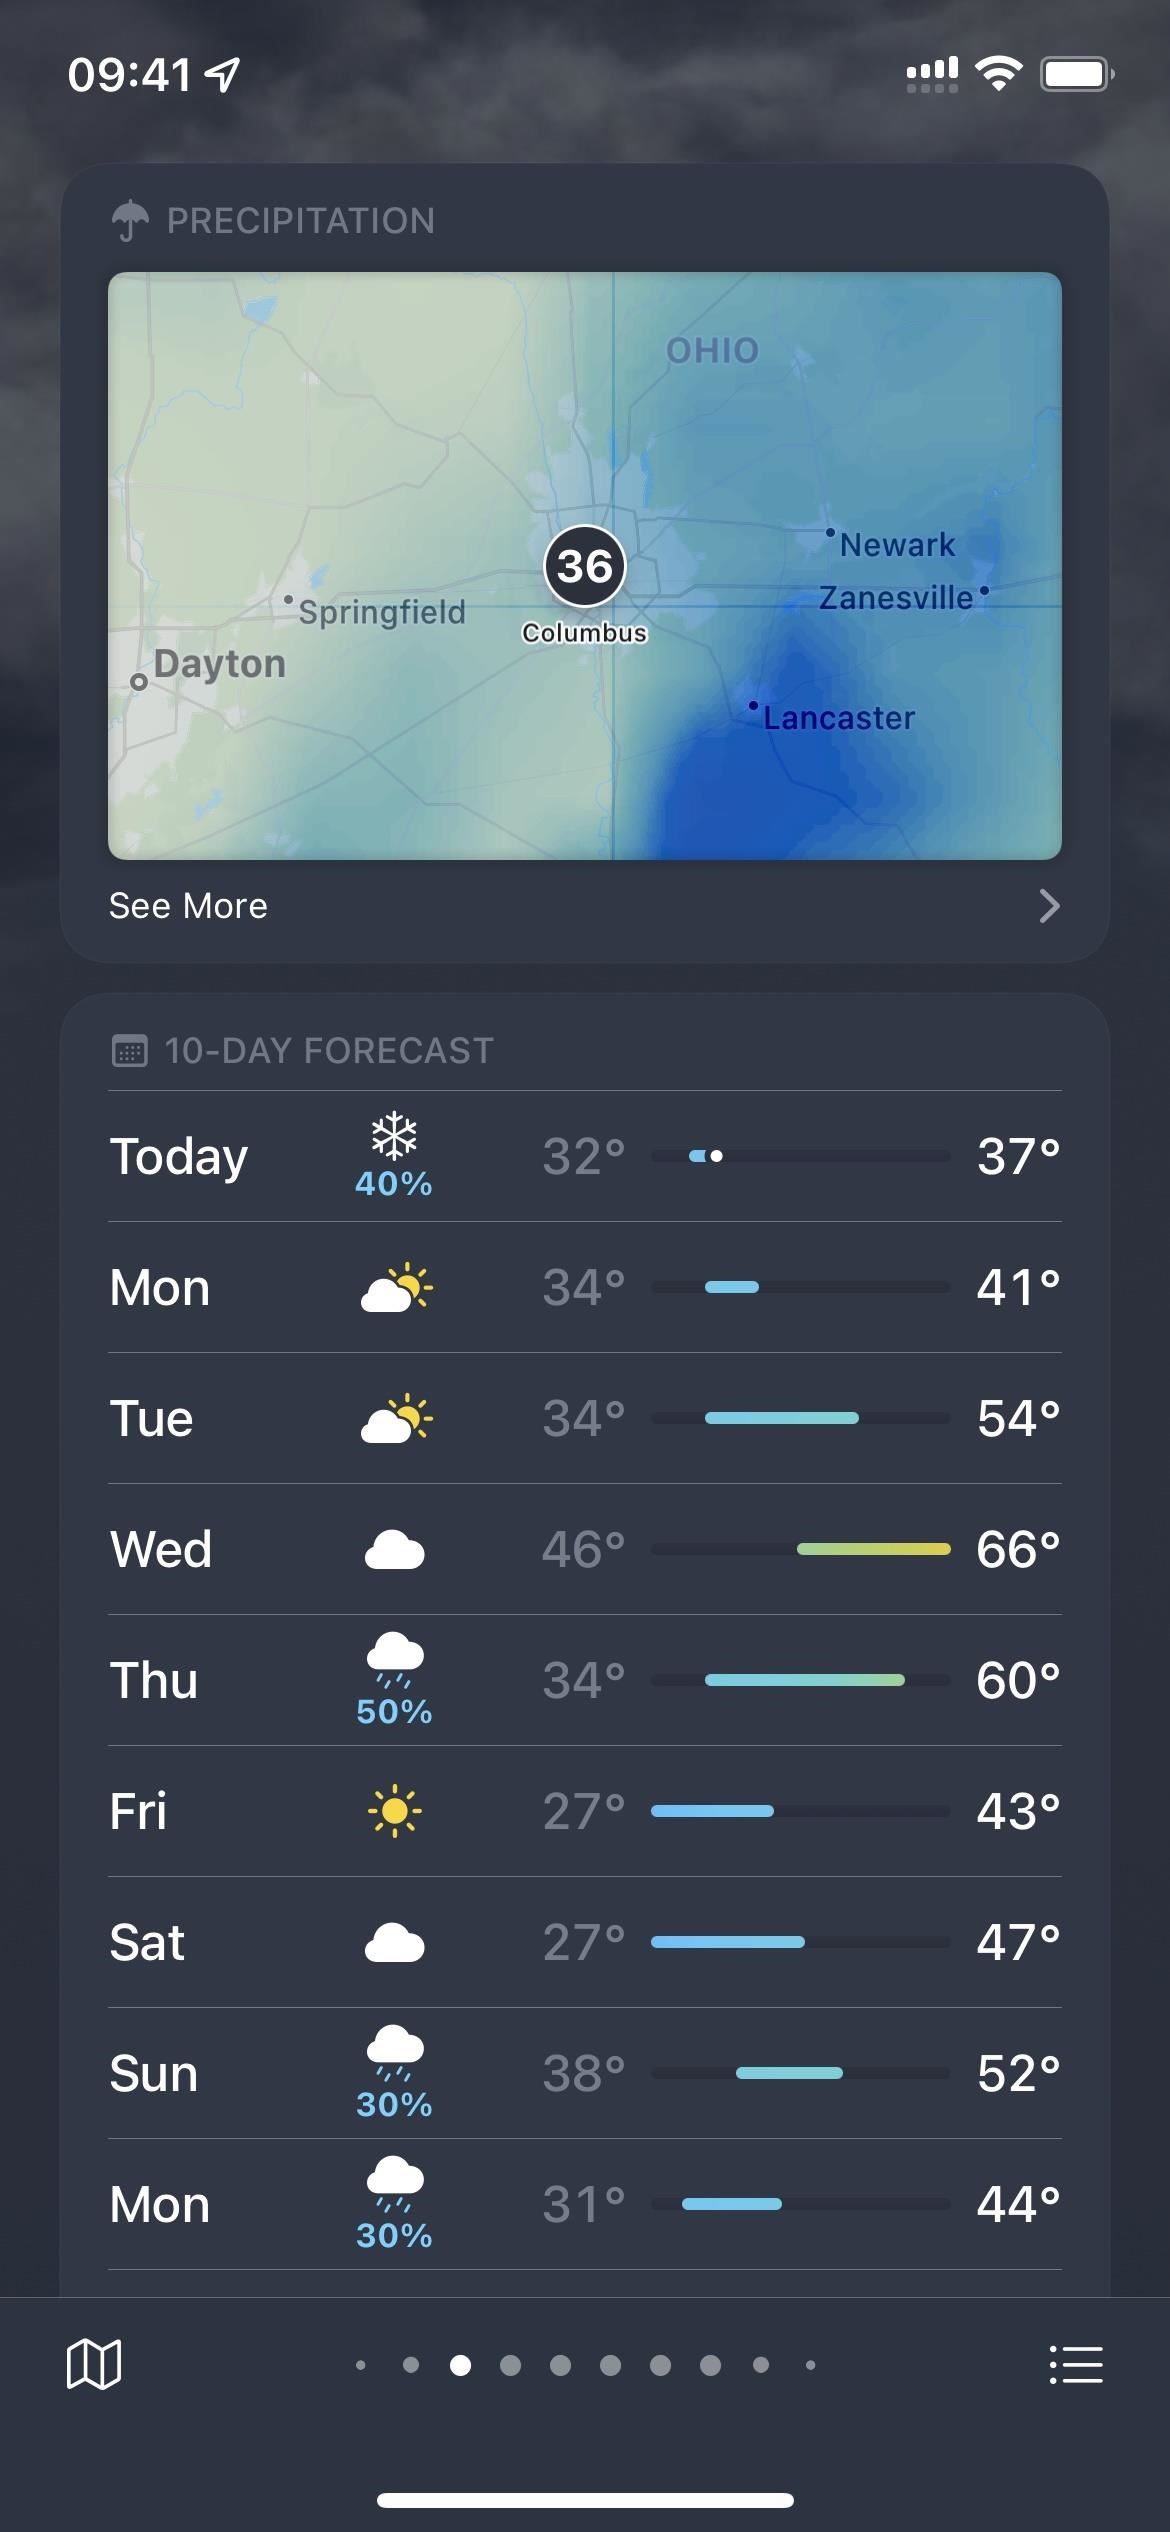 16 Ways to Customize Your iPhone's Weather App (Yes, There Are Really 16 Things You Can Tweak)